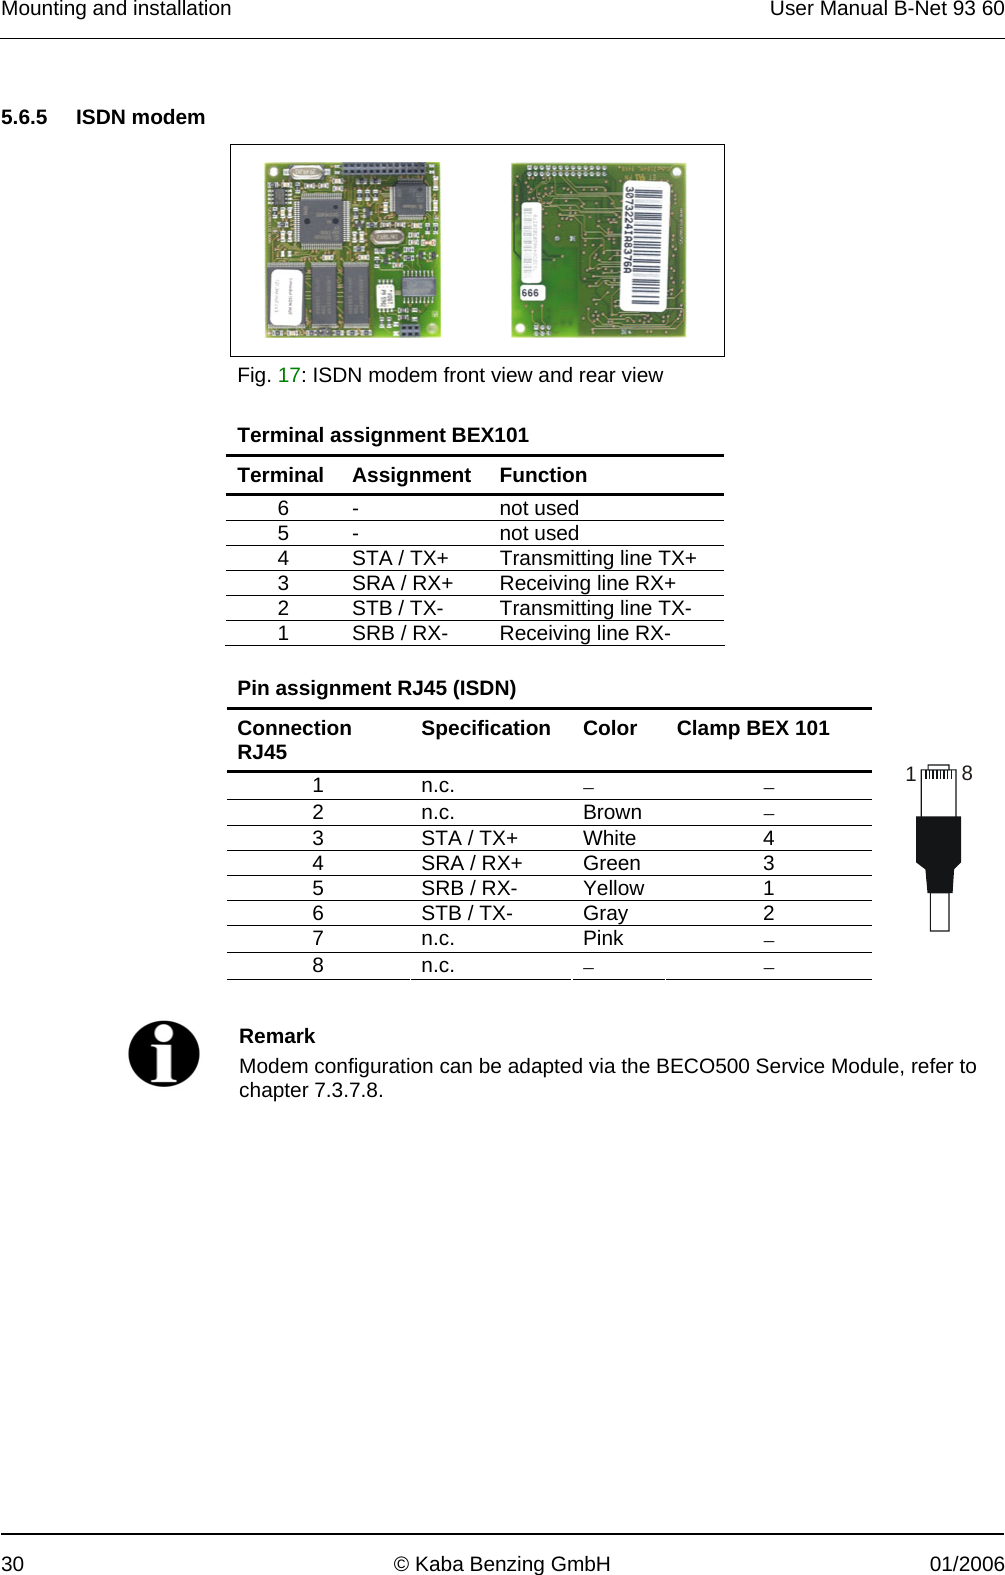 Mounting and installation  User Manual B-Net 93 60 30  © Kaba Benzing GmbH  01/2006   5.6.5 ISDN modem     Fig. 17: ISDN modem front view and rear view  Terminal assignment BEX101 Terminal Assignment Function 6 -  not used 5 -  not used 4  STA / TX+  Transmitting line TX+ 3  SRA / RX+  Receiving line RX+ 2  STB / TX-  Transmitting line TX- 1  SRB / RX-  Receiving line RX-  Pin assignment RJ45 (ISDN) Connection RJ45  Specification  Color  Clamp BEX 101 1 n.c.  − − 2 n.c.  Brown  − 3  STA / TX+  White  4 4  SRA / RX+  Green  3 5  SRB / RX-  Yellow  1 6  STB / TX-  Gray  2 7 n.c.  Pink  − 8 n.c.  − −  18    Remark Modem configuration can be adapted via the BECO500 Service Module, refer to chapter 7.3.7.8.  